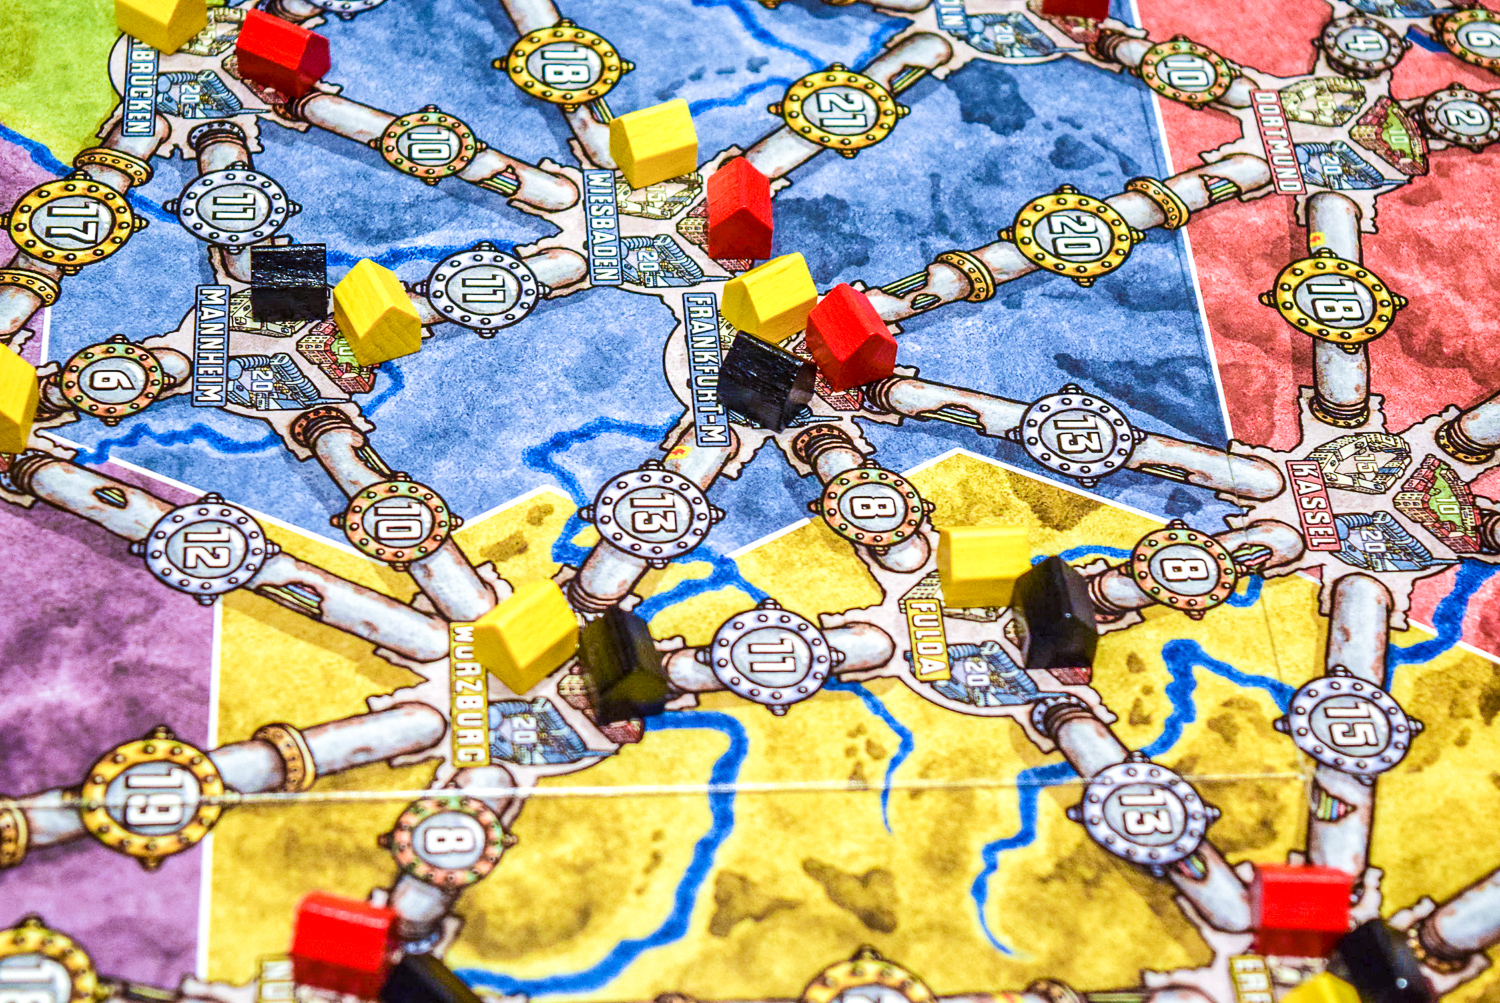 Houses on cities for Power Grid Board Game up close from side